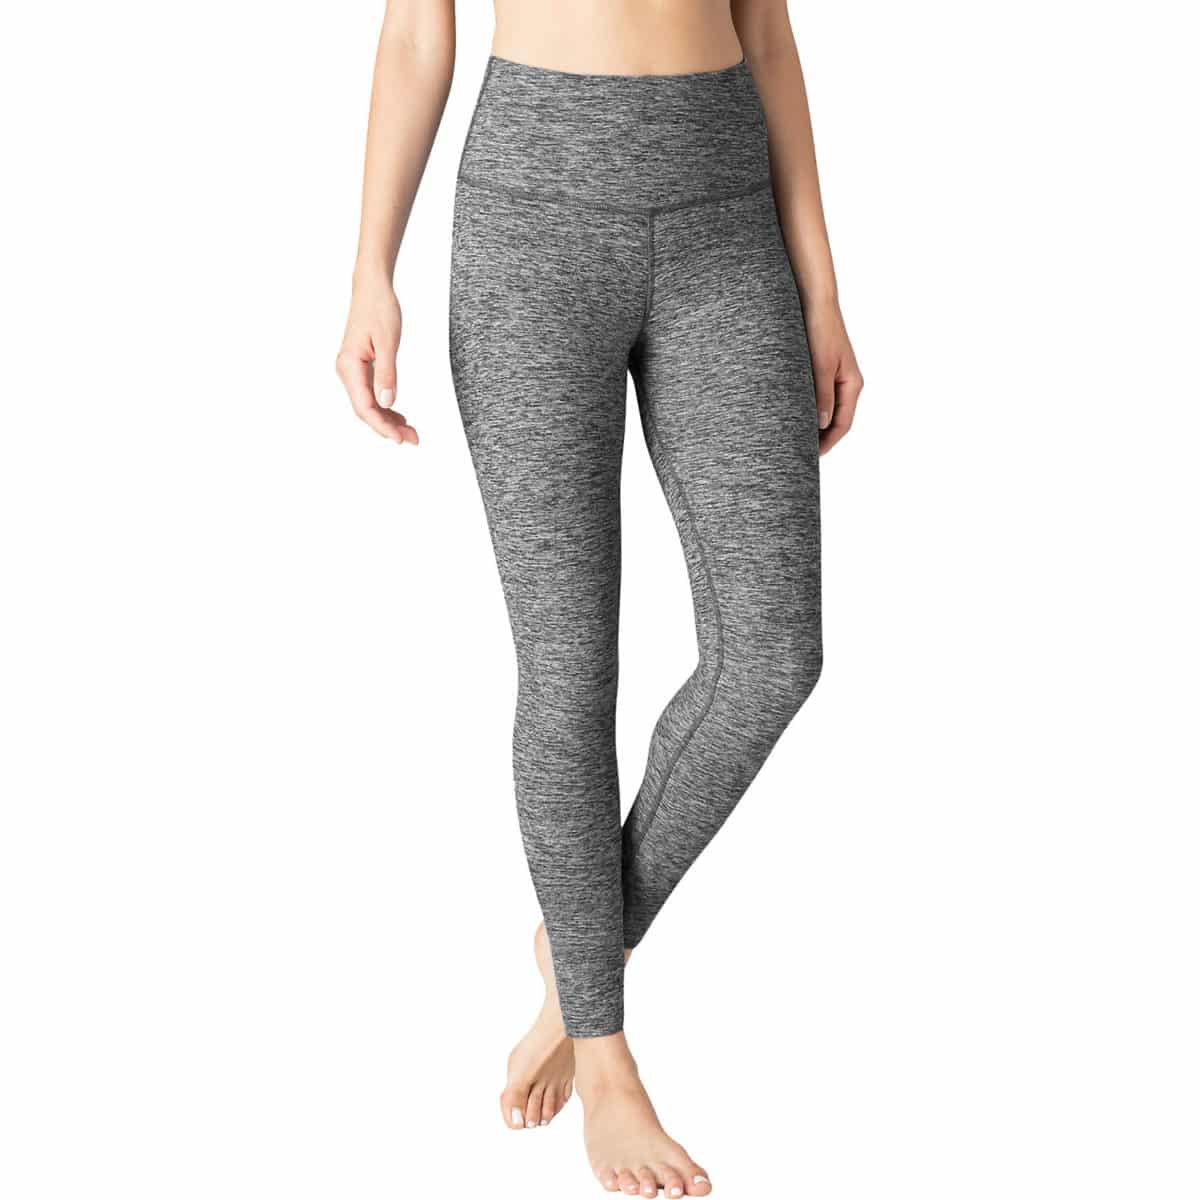 Beyond Yoga Clothing Review - Must Read This Before Buying